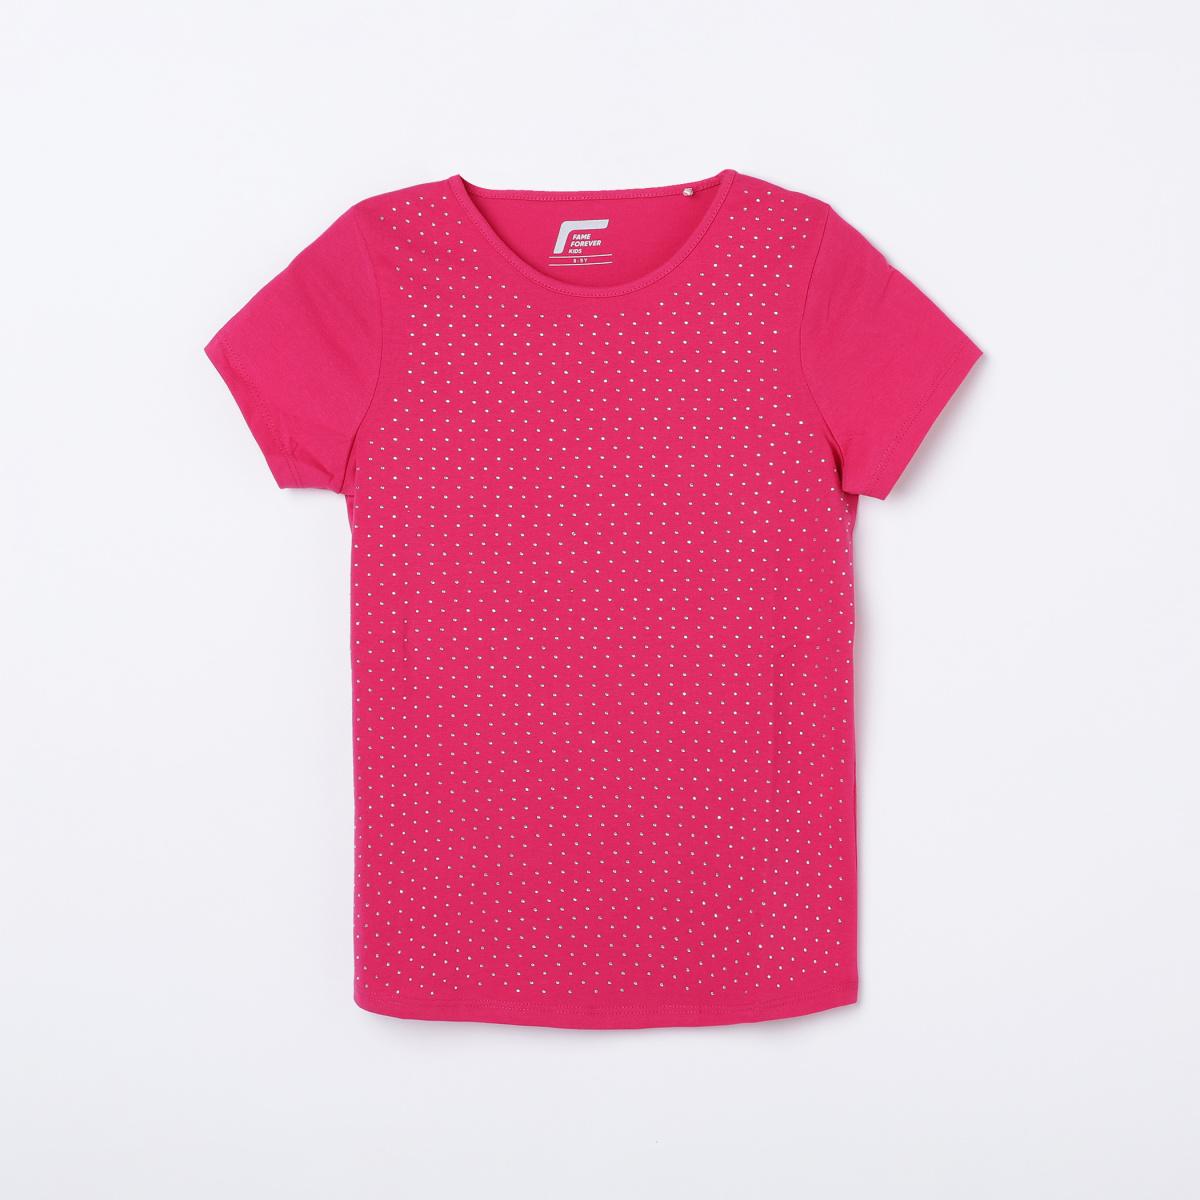 FAME FOREVER YOUNG Girls Polka Dot Print Round Neck Top